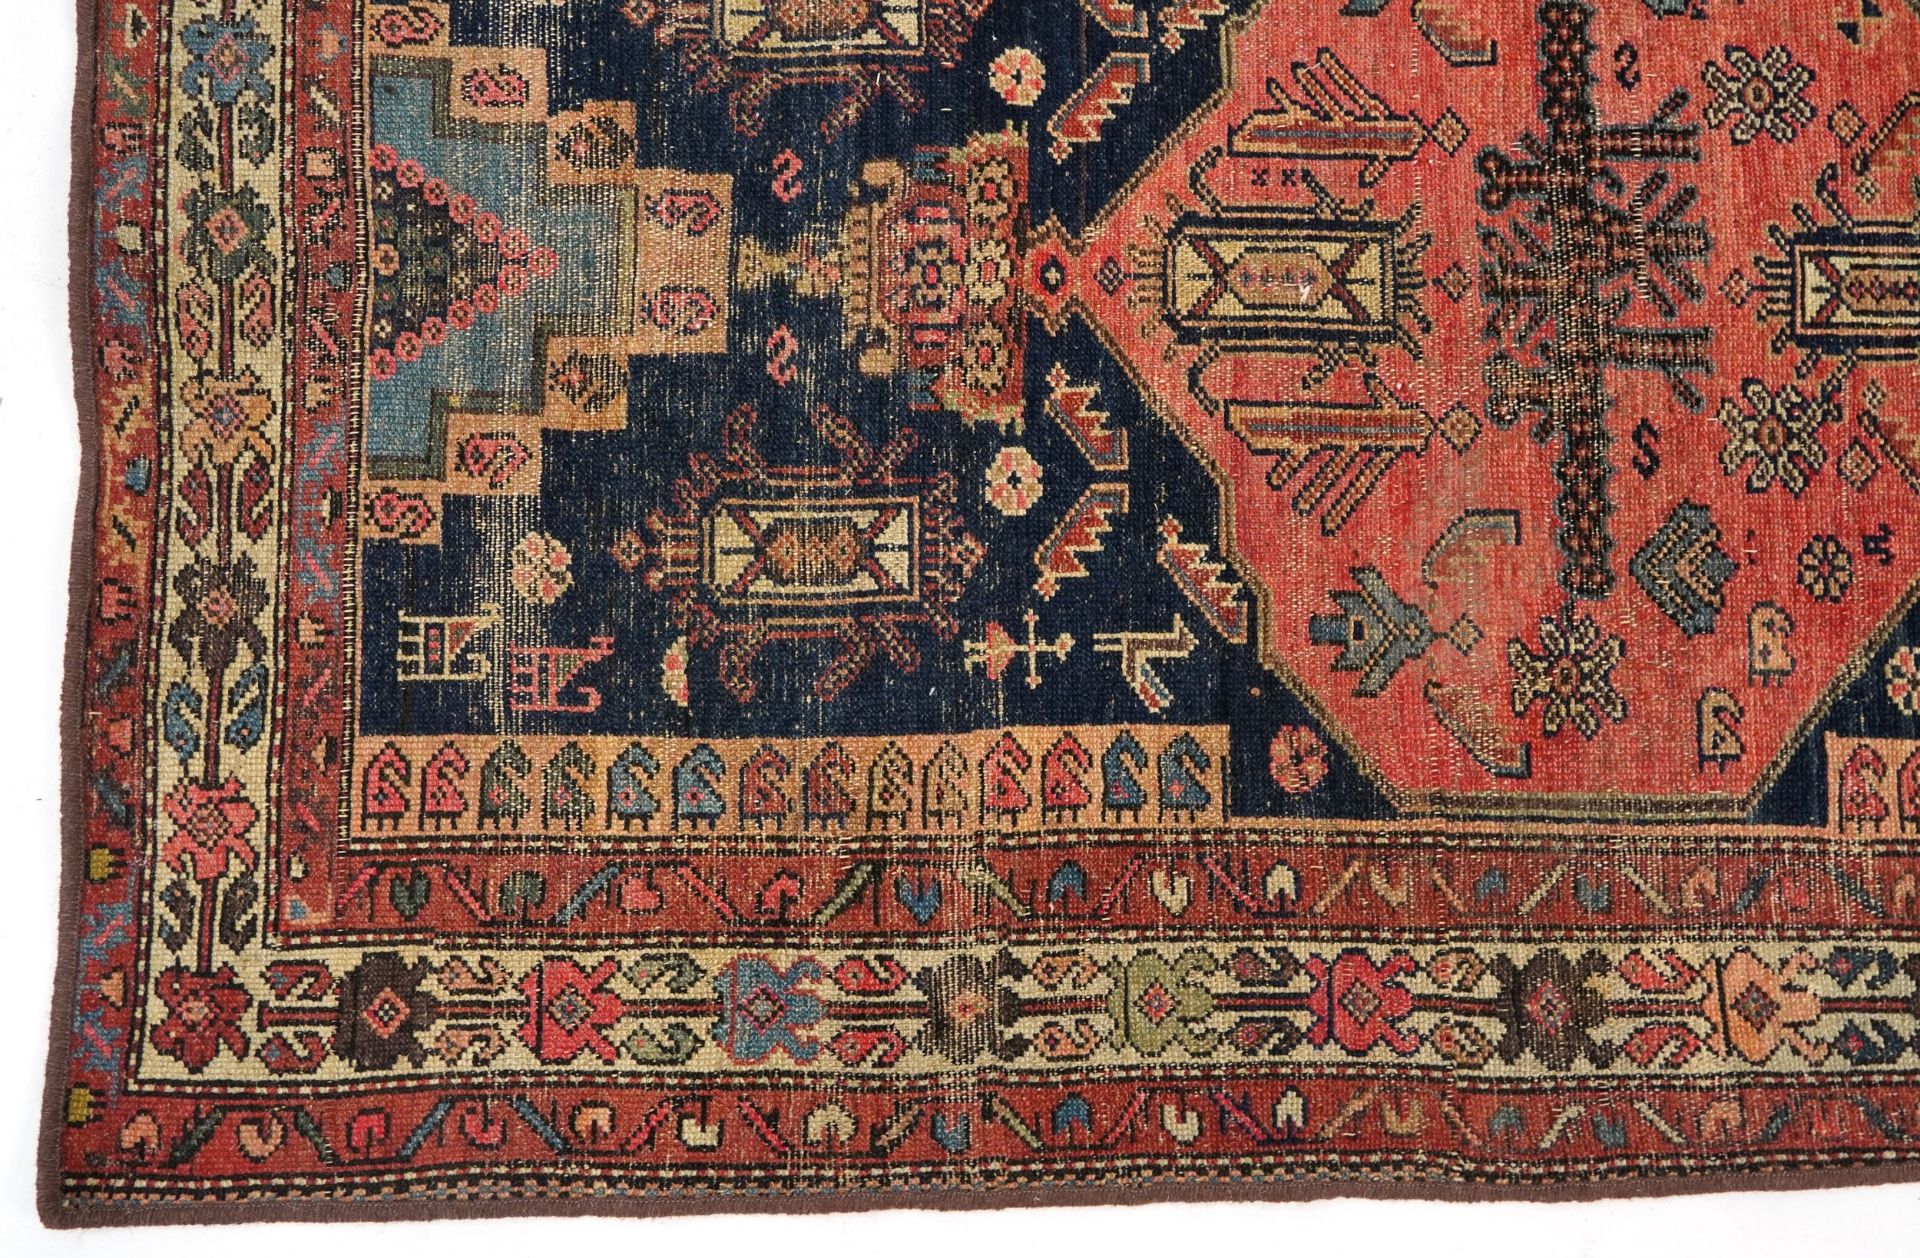 Rectangular Afghan red and blue ground rug with all over geometric and animal design, 177cm x 120cm - Image 4 of 6